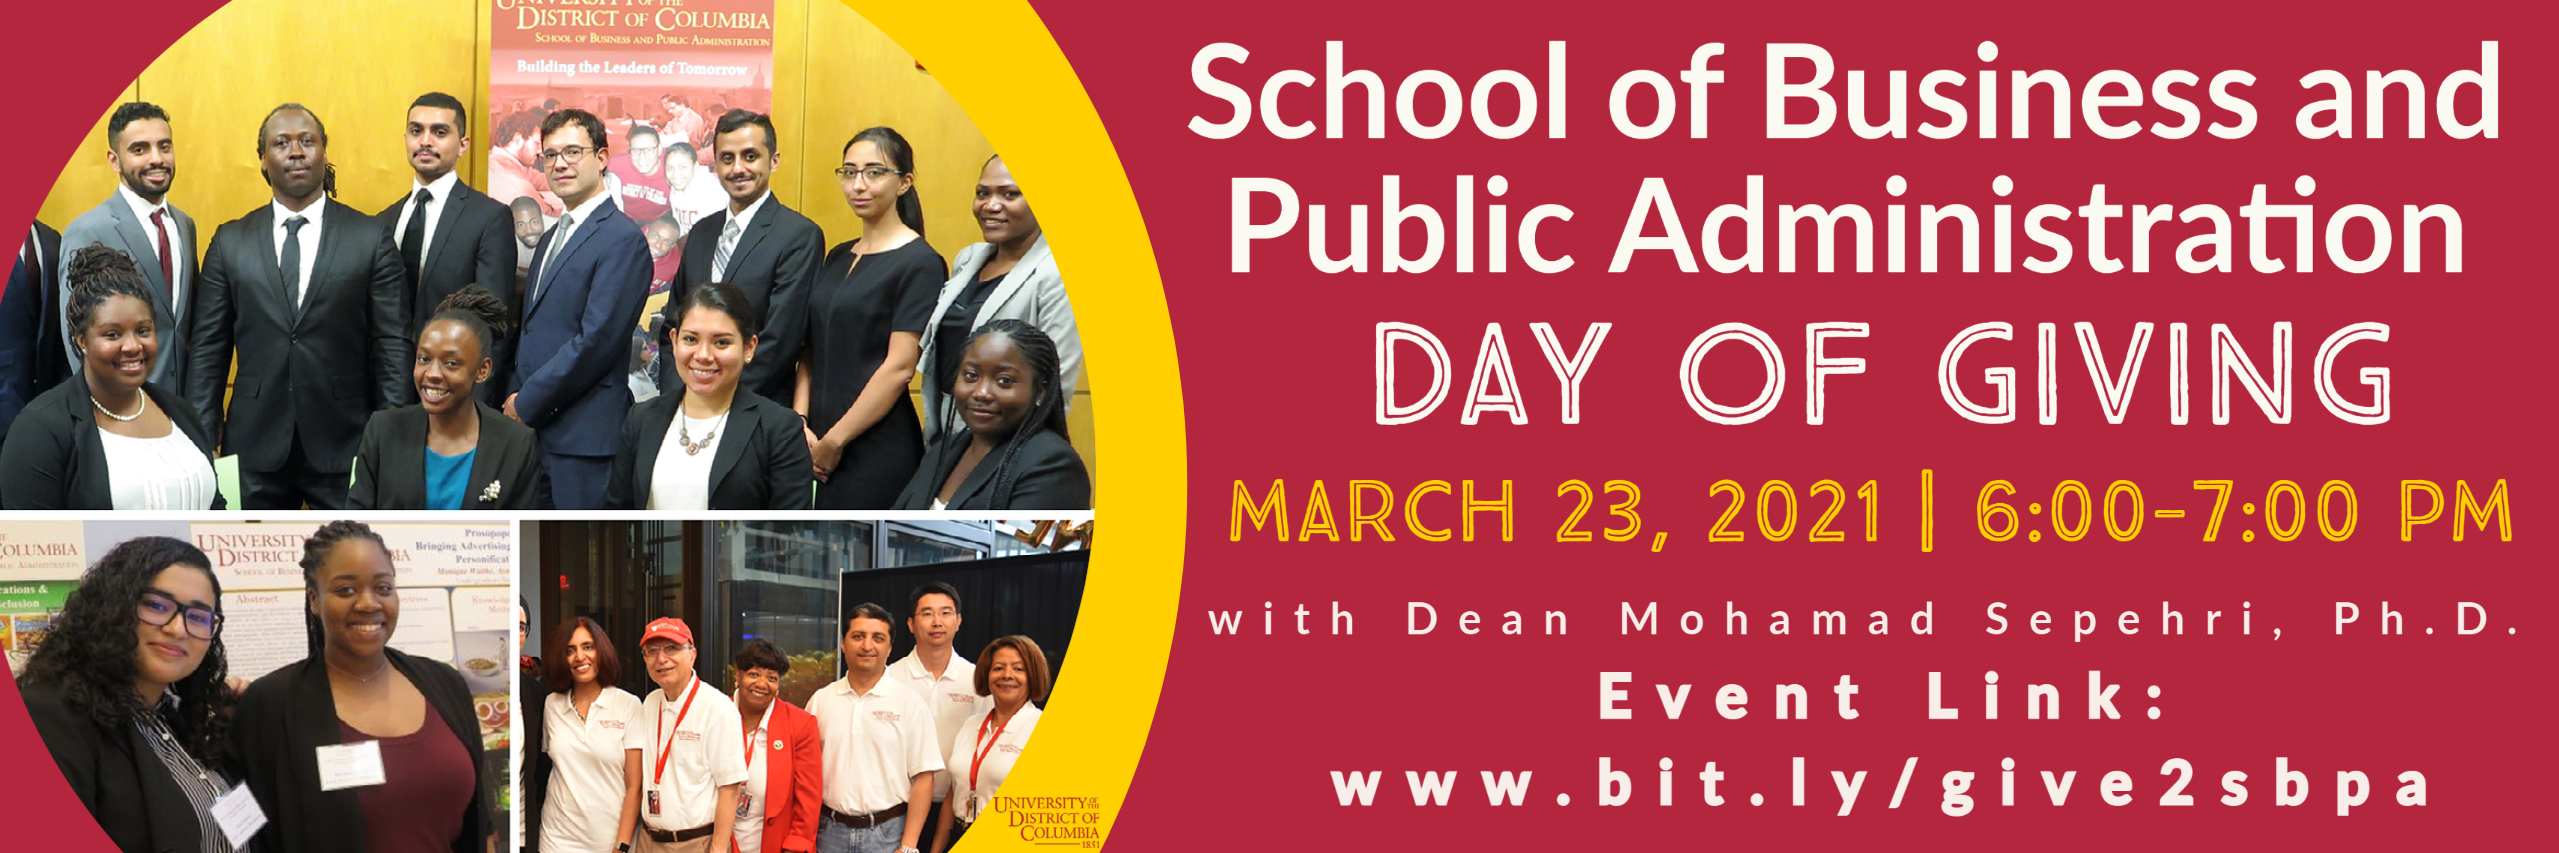 SBPA DAY OF GIVING – School of Business and Public Administration – March 23, 2021